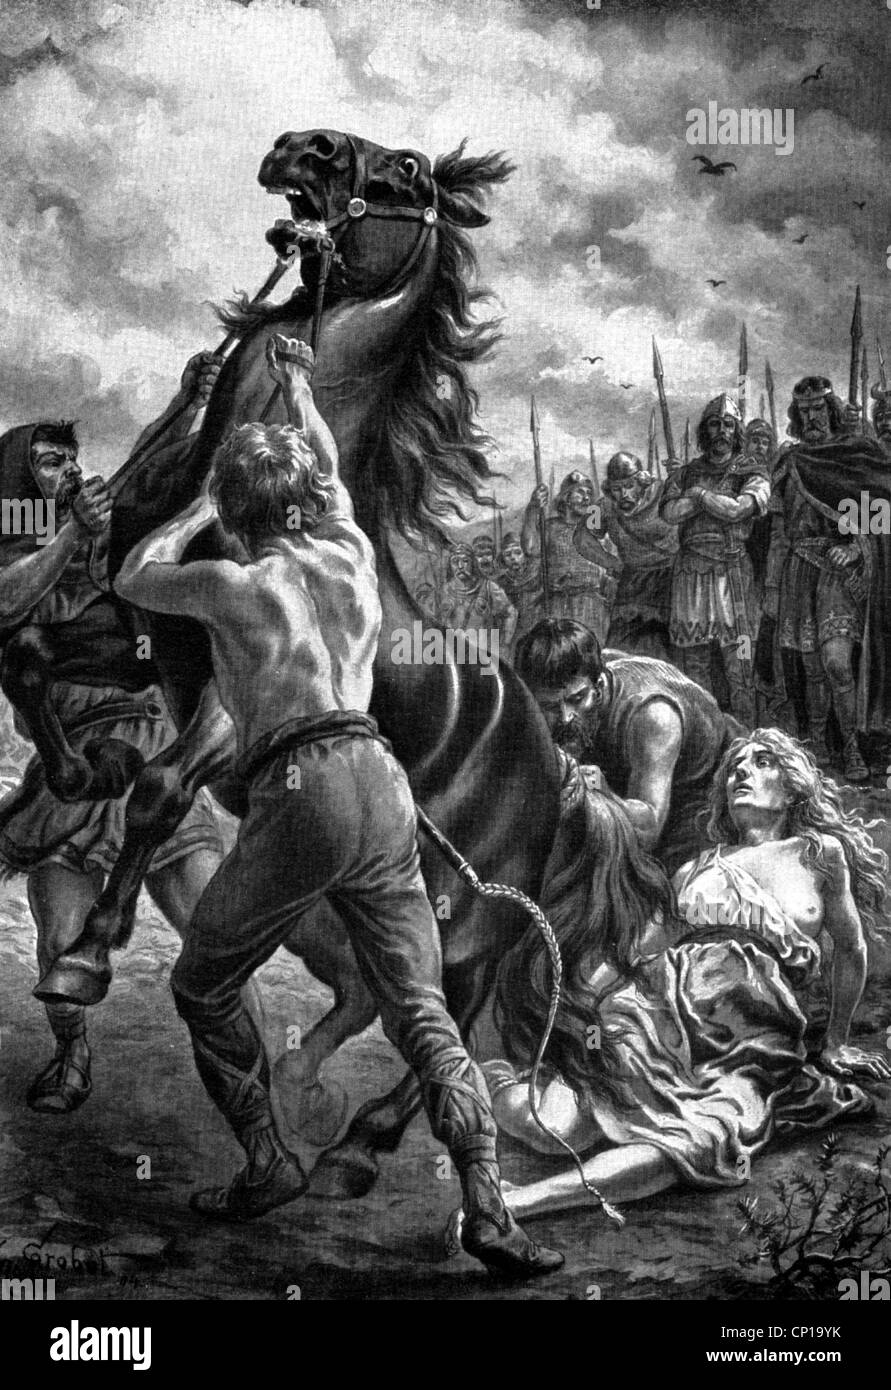 literature, The Nibelungen, Brunhilde's death, illustration, 19th century, historic, historical, Brunhilde, Brunhild, dying, Germanic hero legend, saga, myth, mythology, Germanic, Teuton, the Germanic people, Teutons, horse, falling, Nibelungs, Nibelung, Additional-Rights-Clearences-Not Available Stock Photo